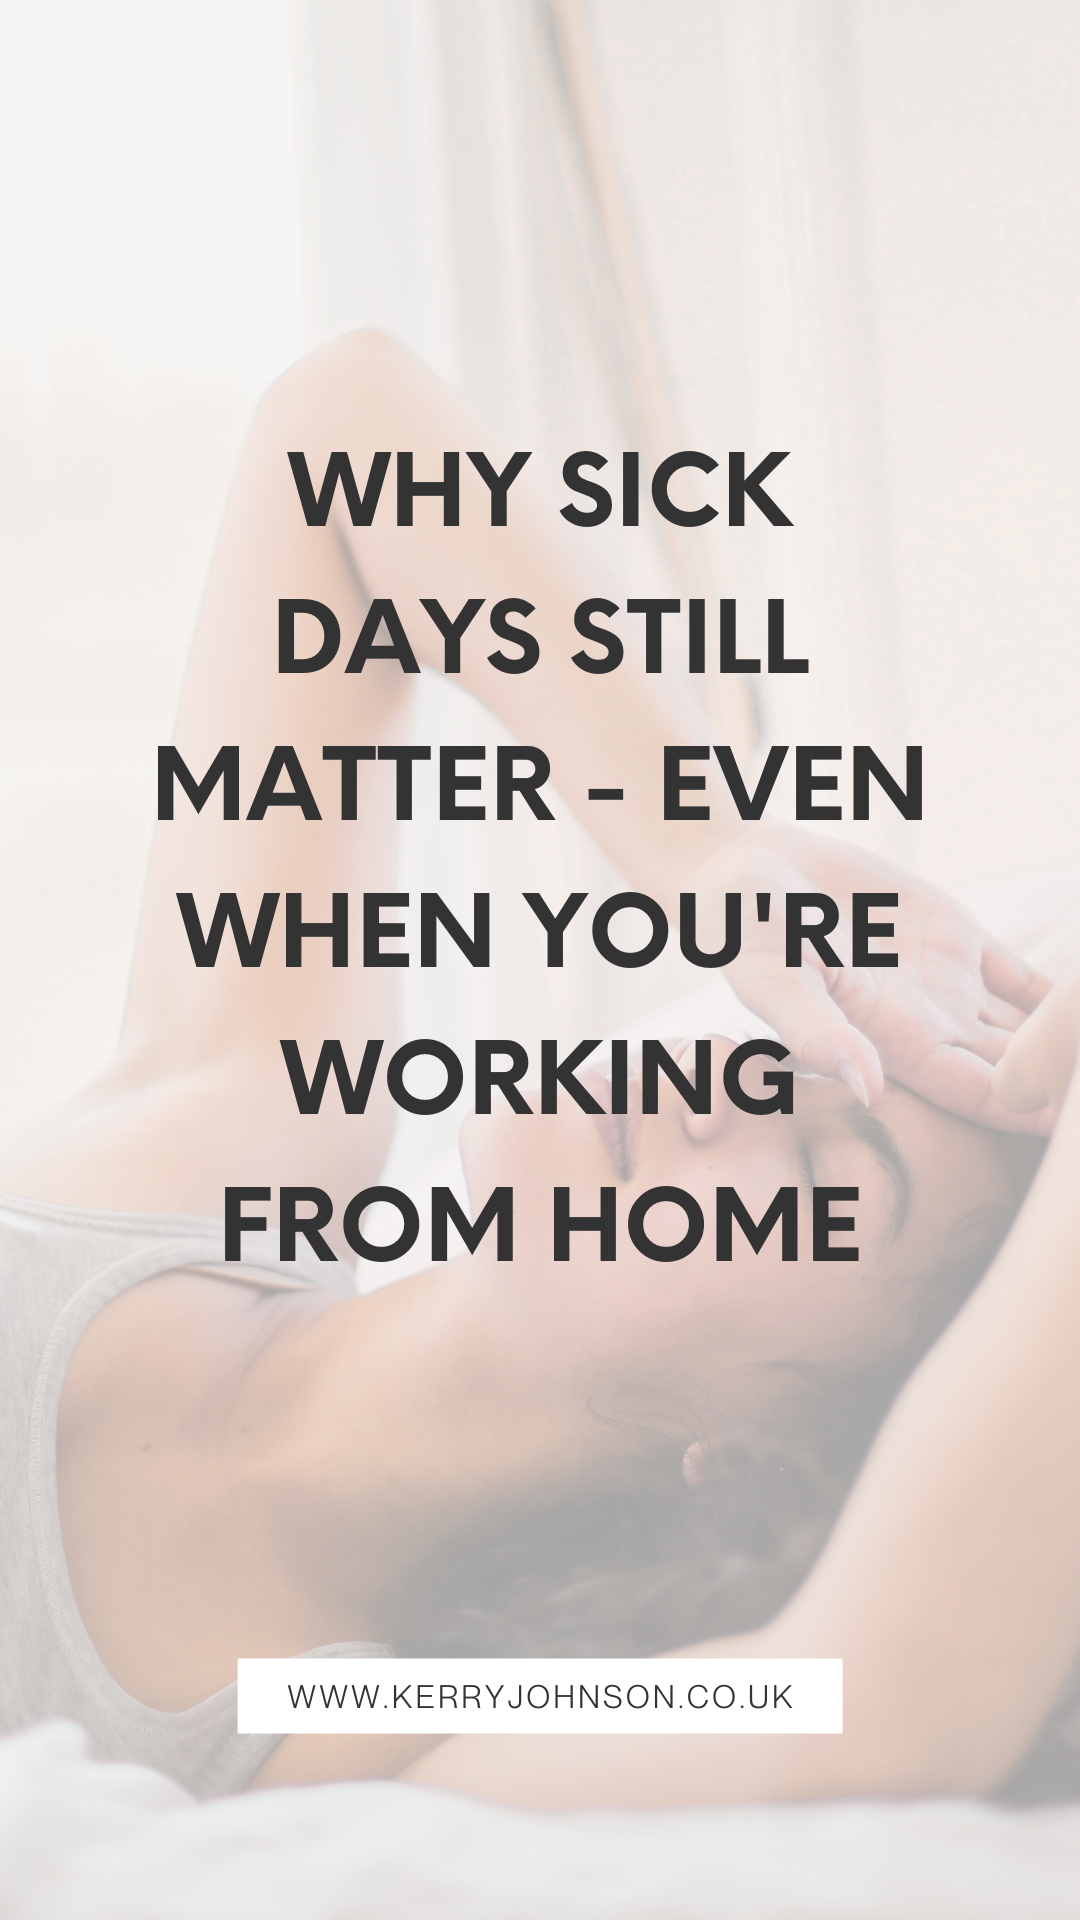 Why Sick Days Still Matter - Even When You're Working From Home